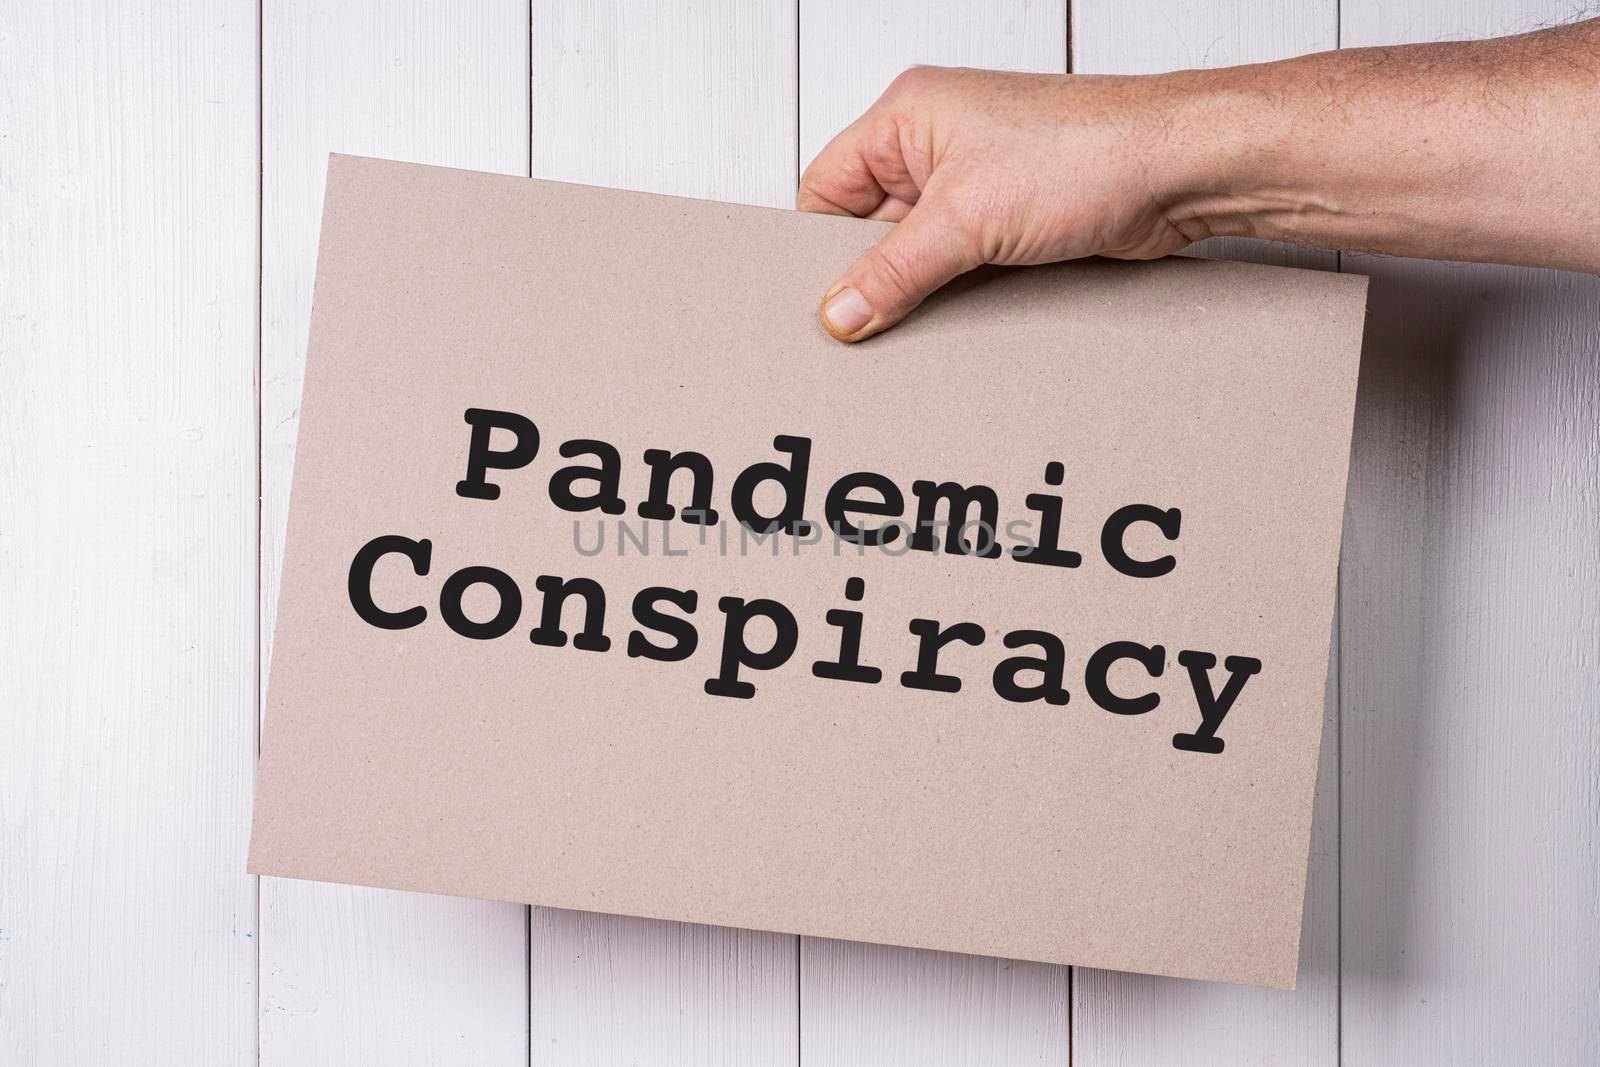 Pandemic conspiracy sign by sergiodv